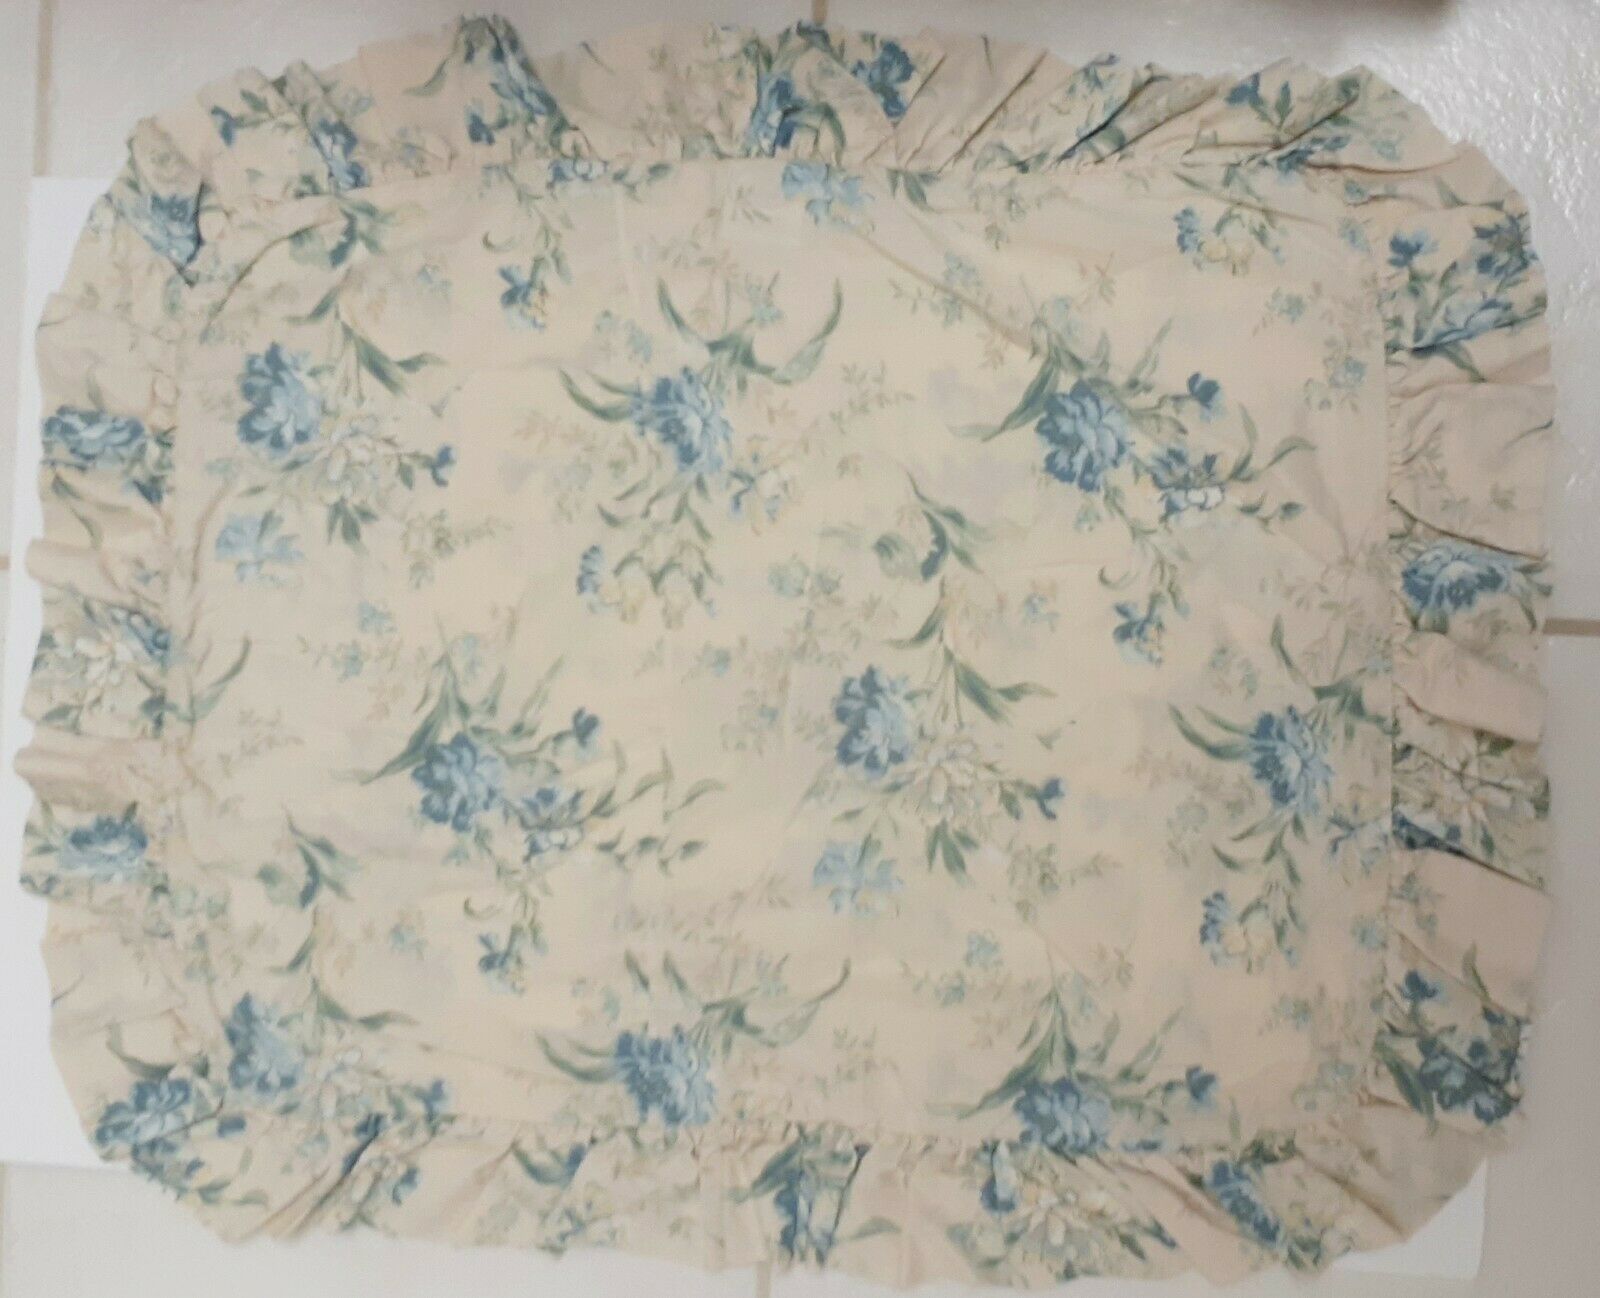 Primary image for Laura Ashley Pillow Sham Cover Ruffle Floral Blue Cream Check Trim STANDARD (1)